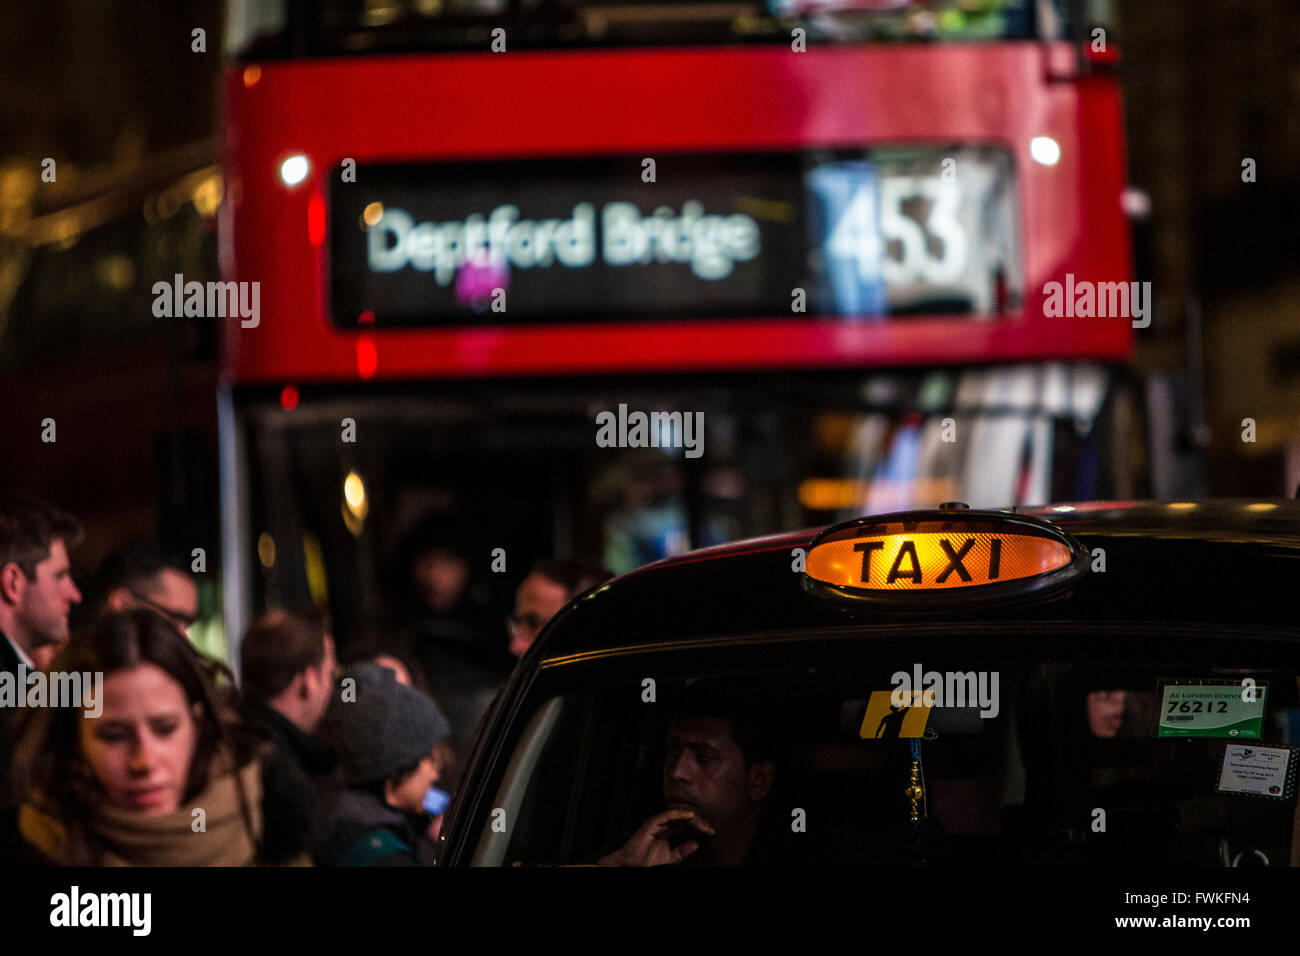 London schwarzes Taxi Cab und roten London Bus Routemaster am Piccadilly Circus in London. Stockfoto